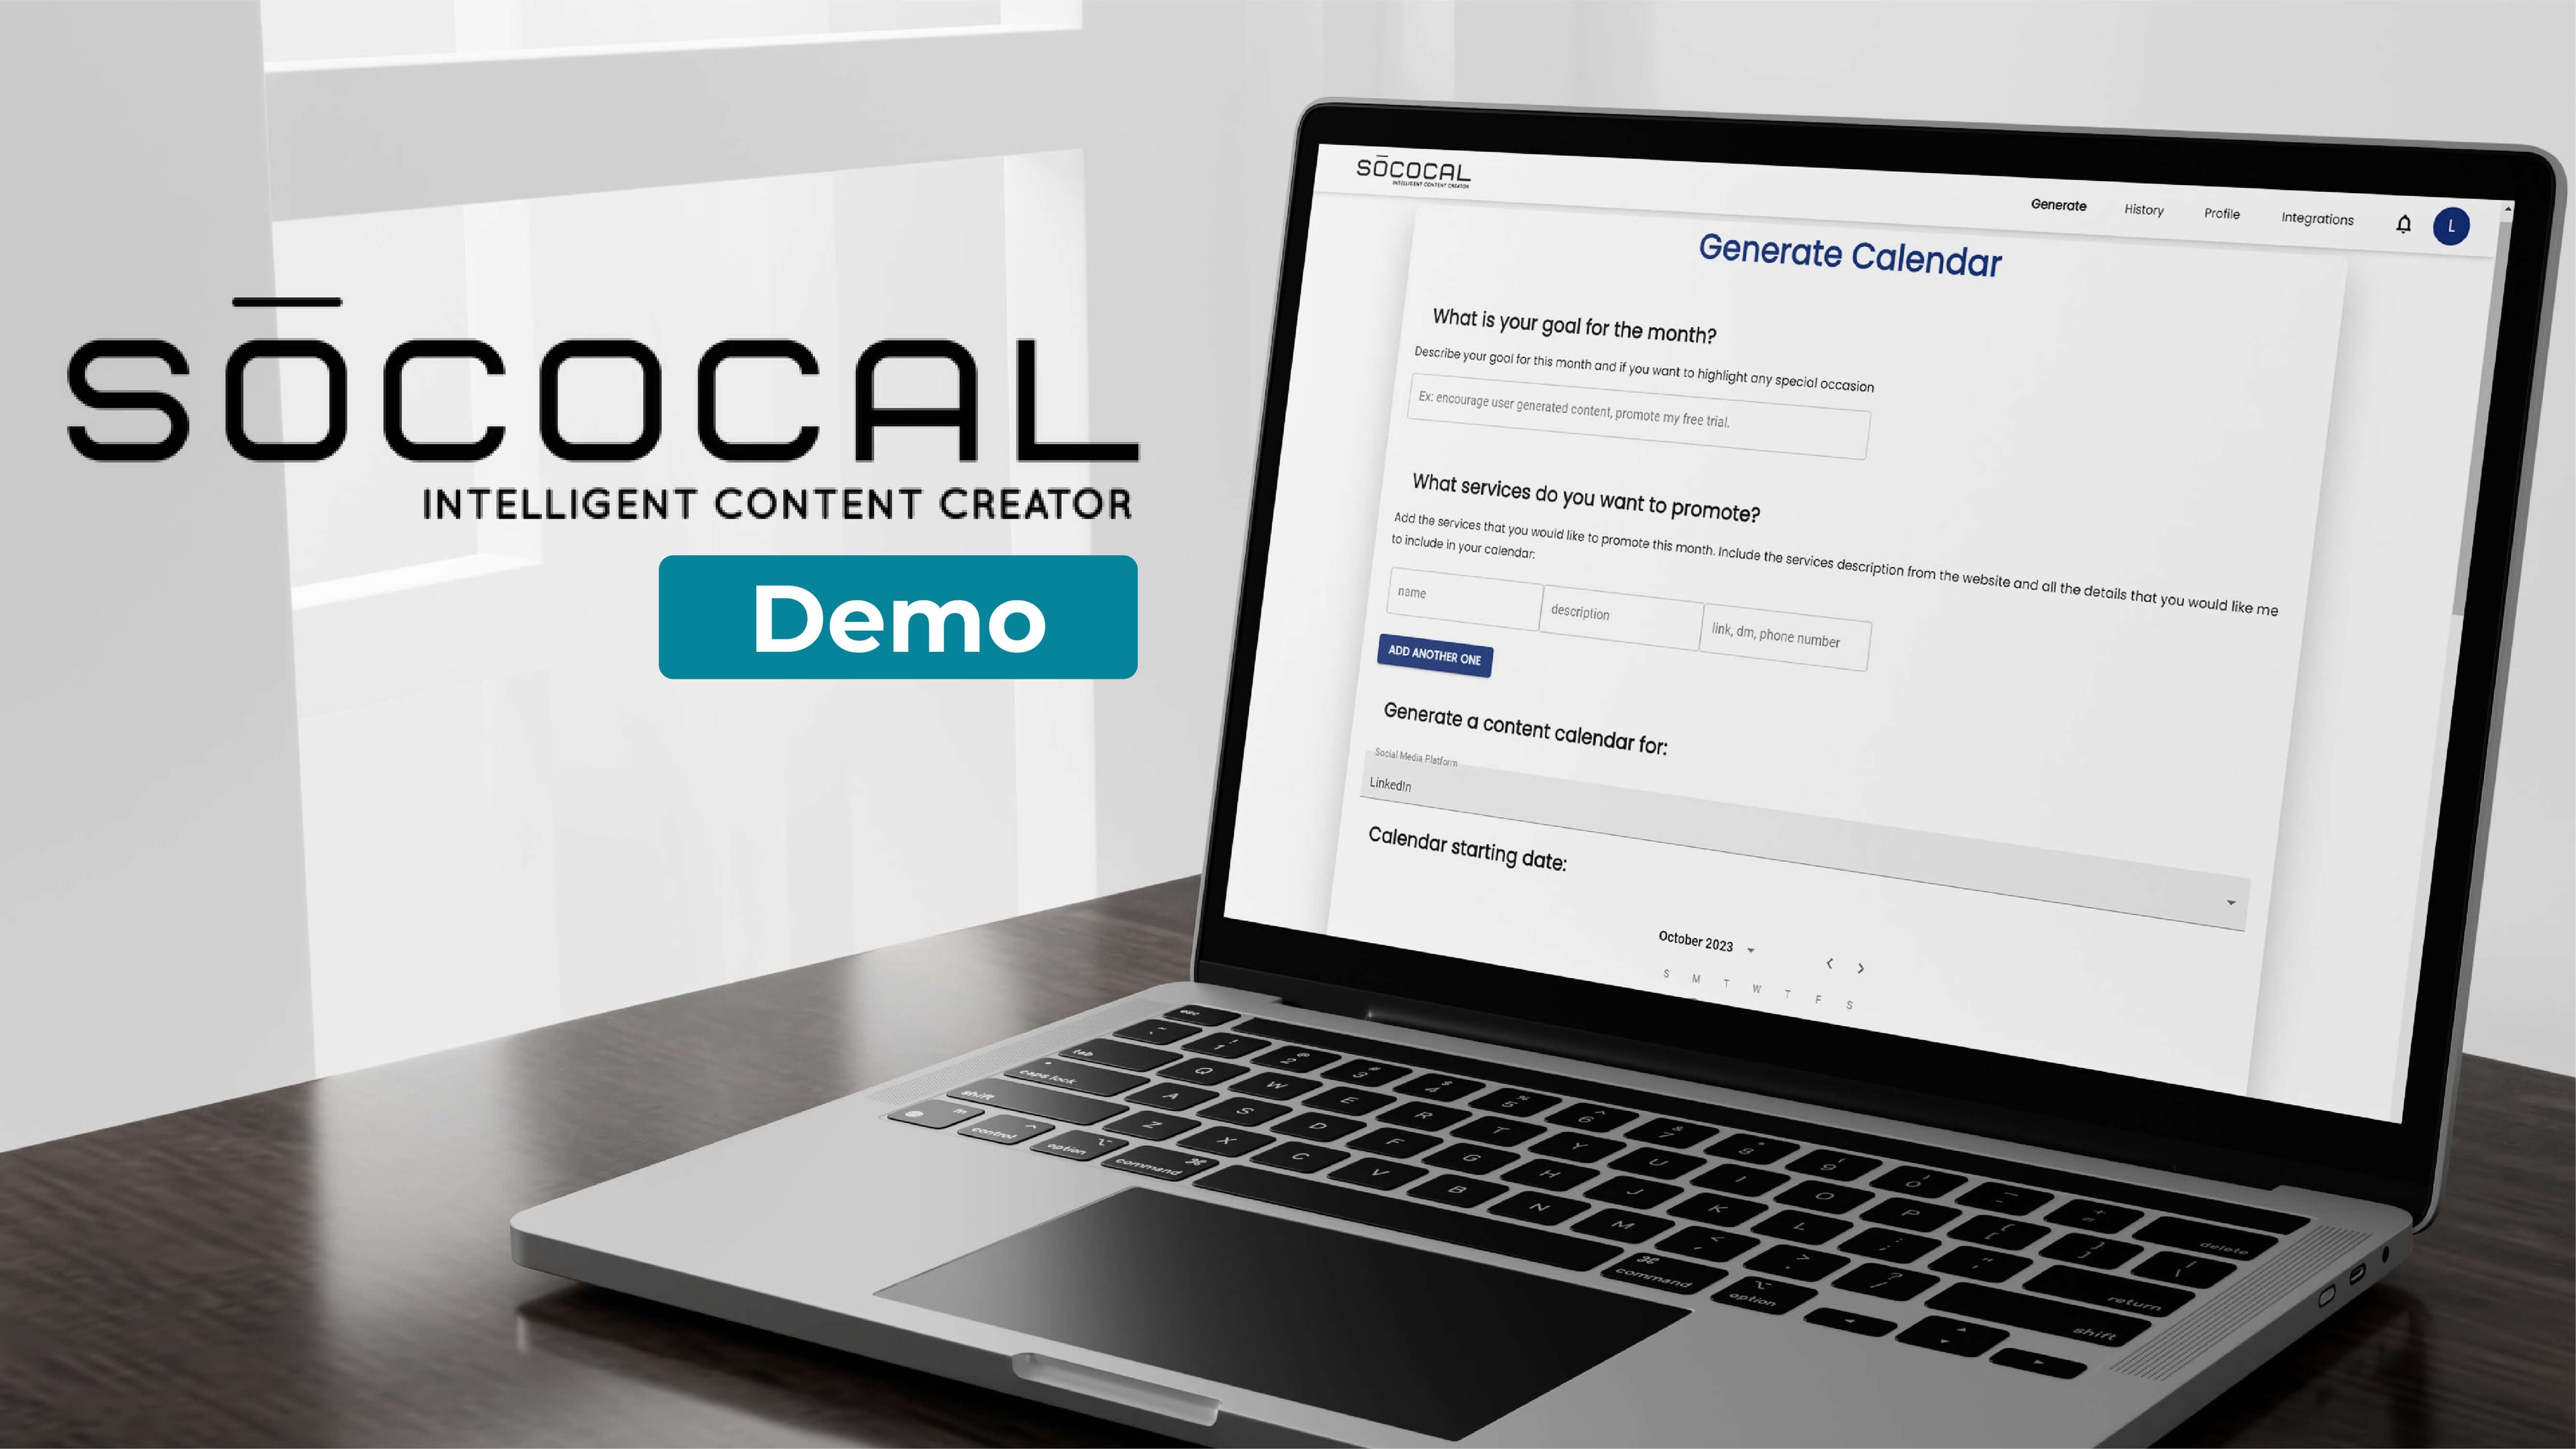 Load video: Demo Video on how to use sococal to generate a 30 day social media content calendar